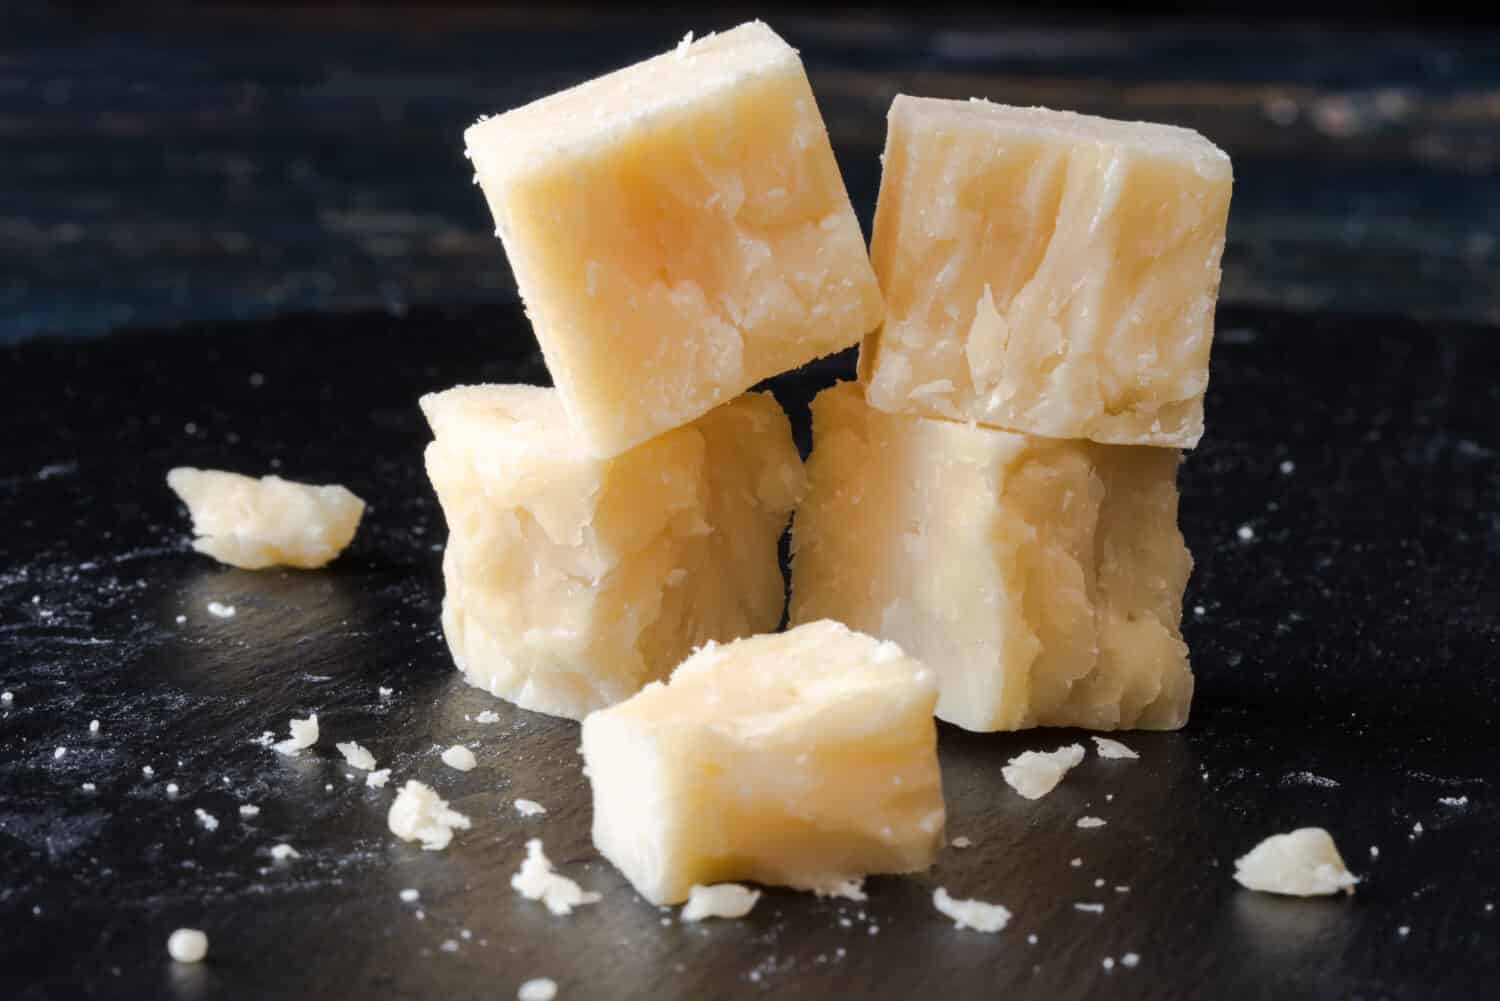 White Cheddar Cheese Cubes on a Black Slate